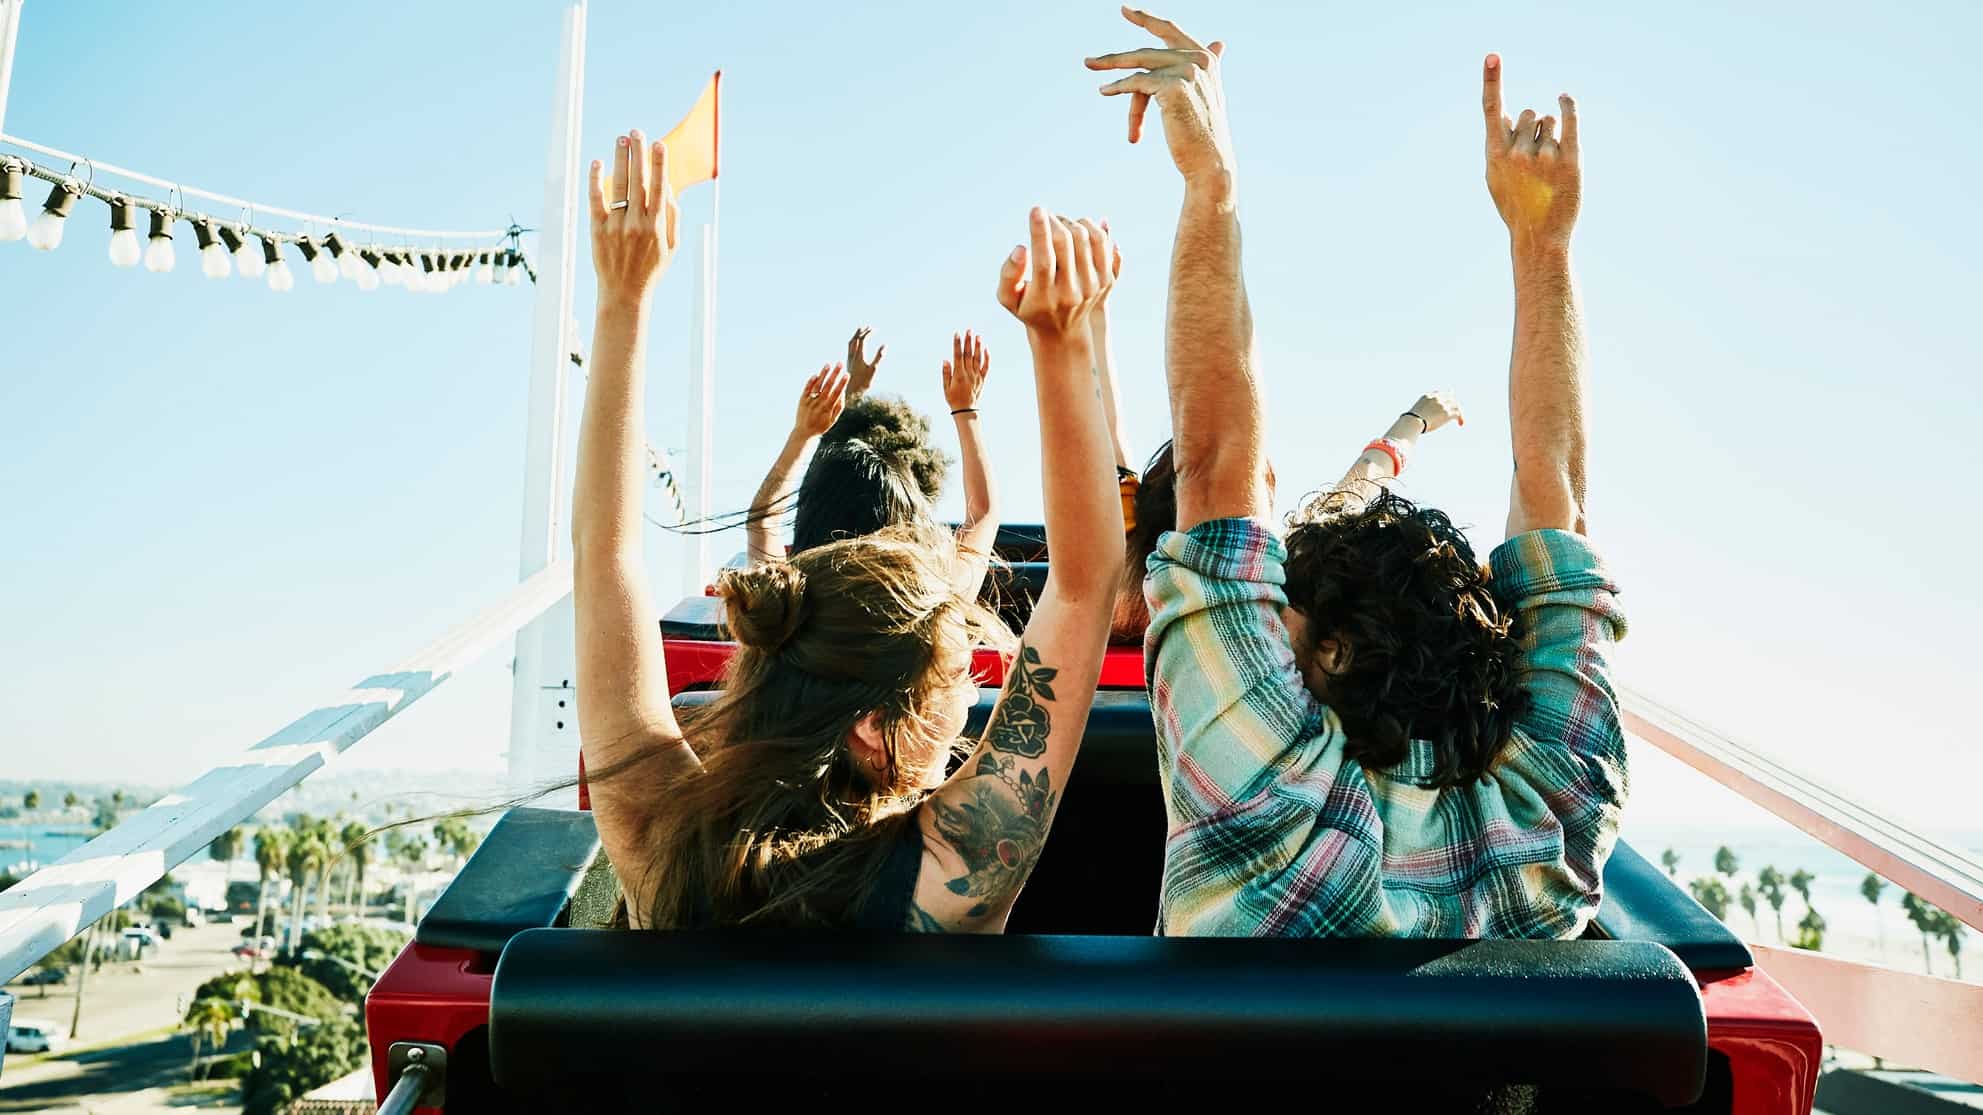 People on a rollercoaster waving hands in the air, indicating a plummeting or rising share price